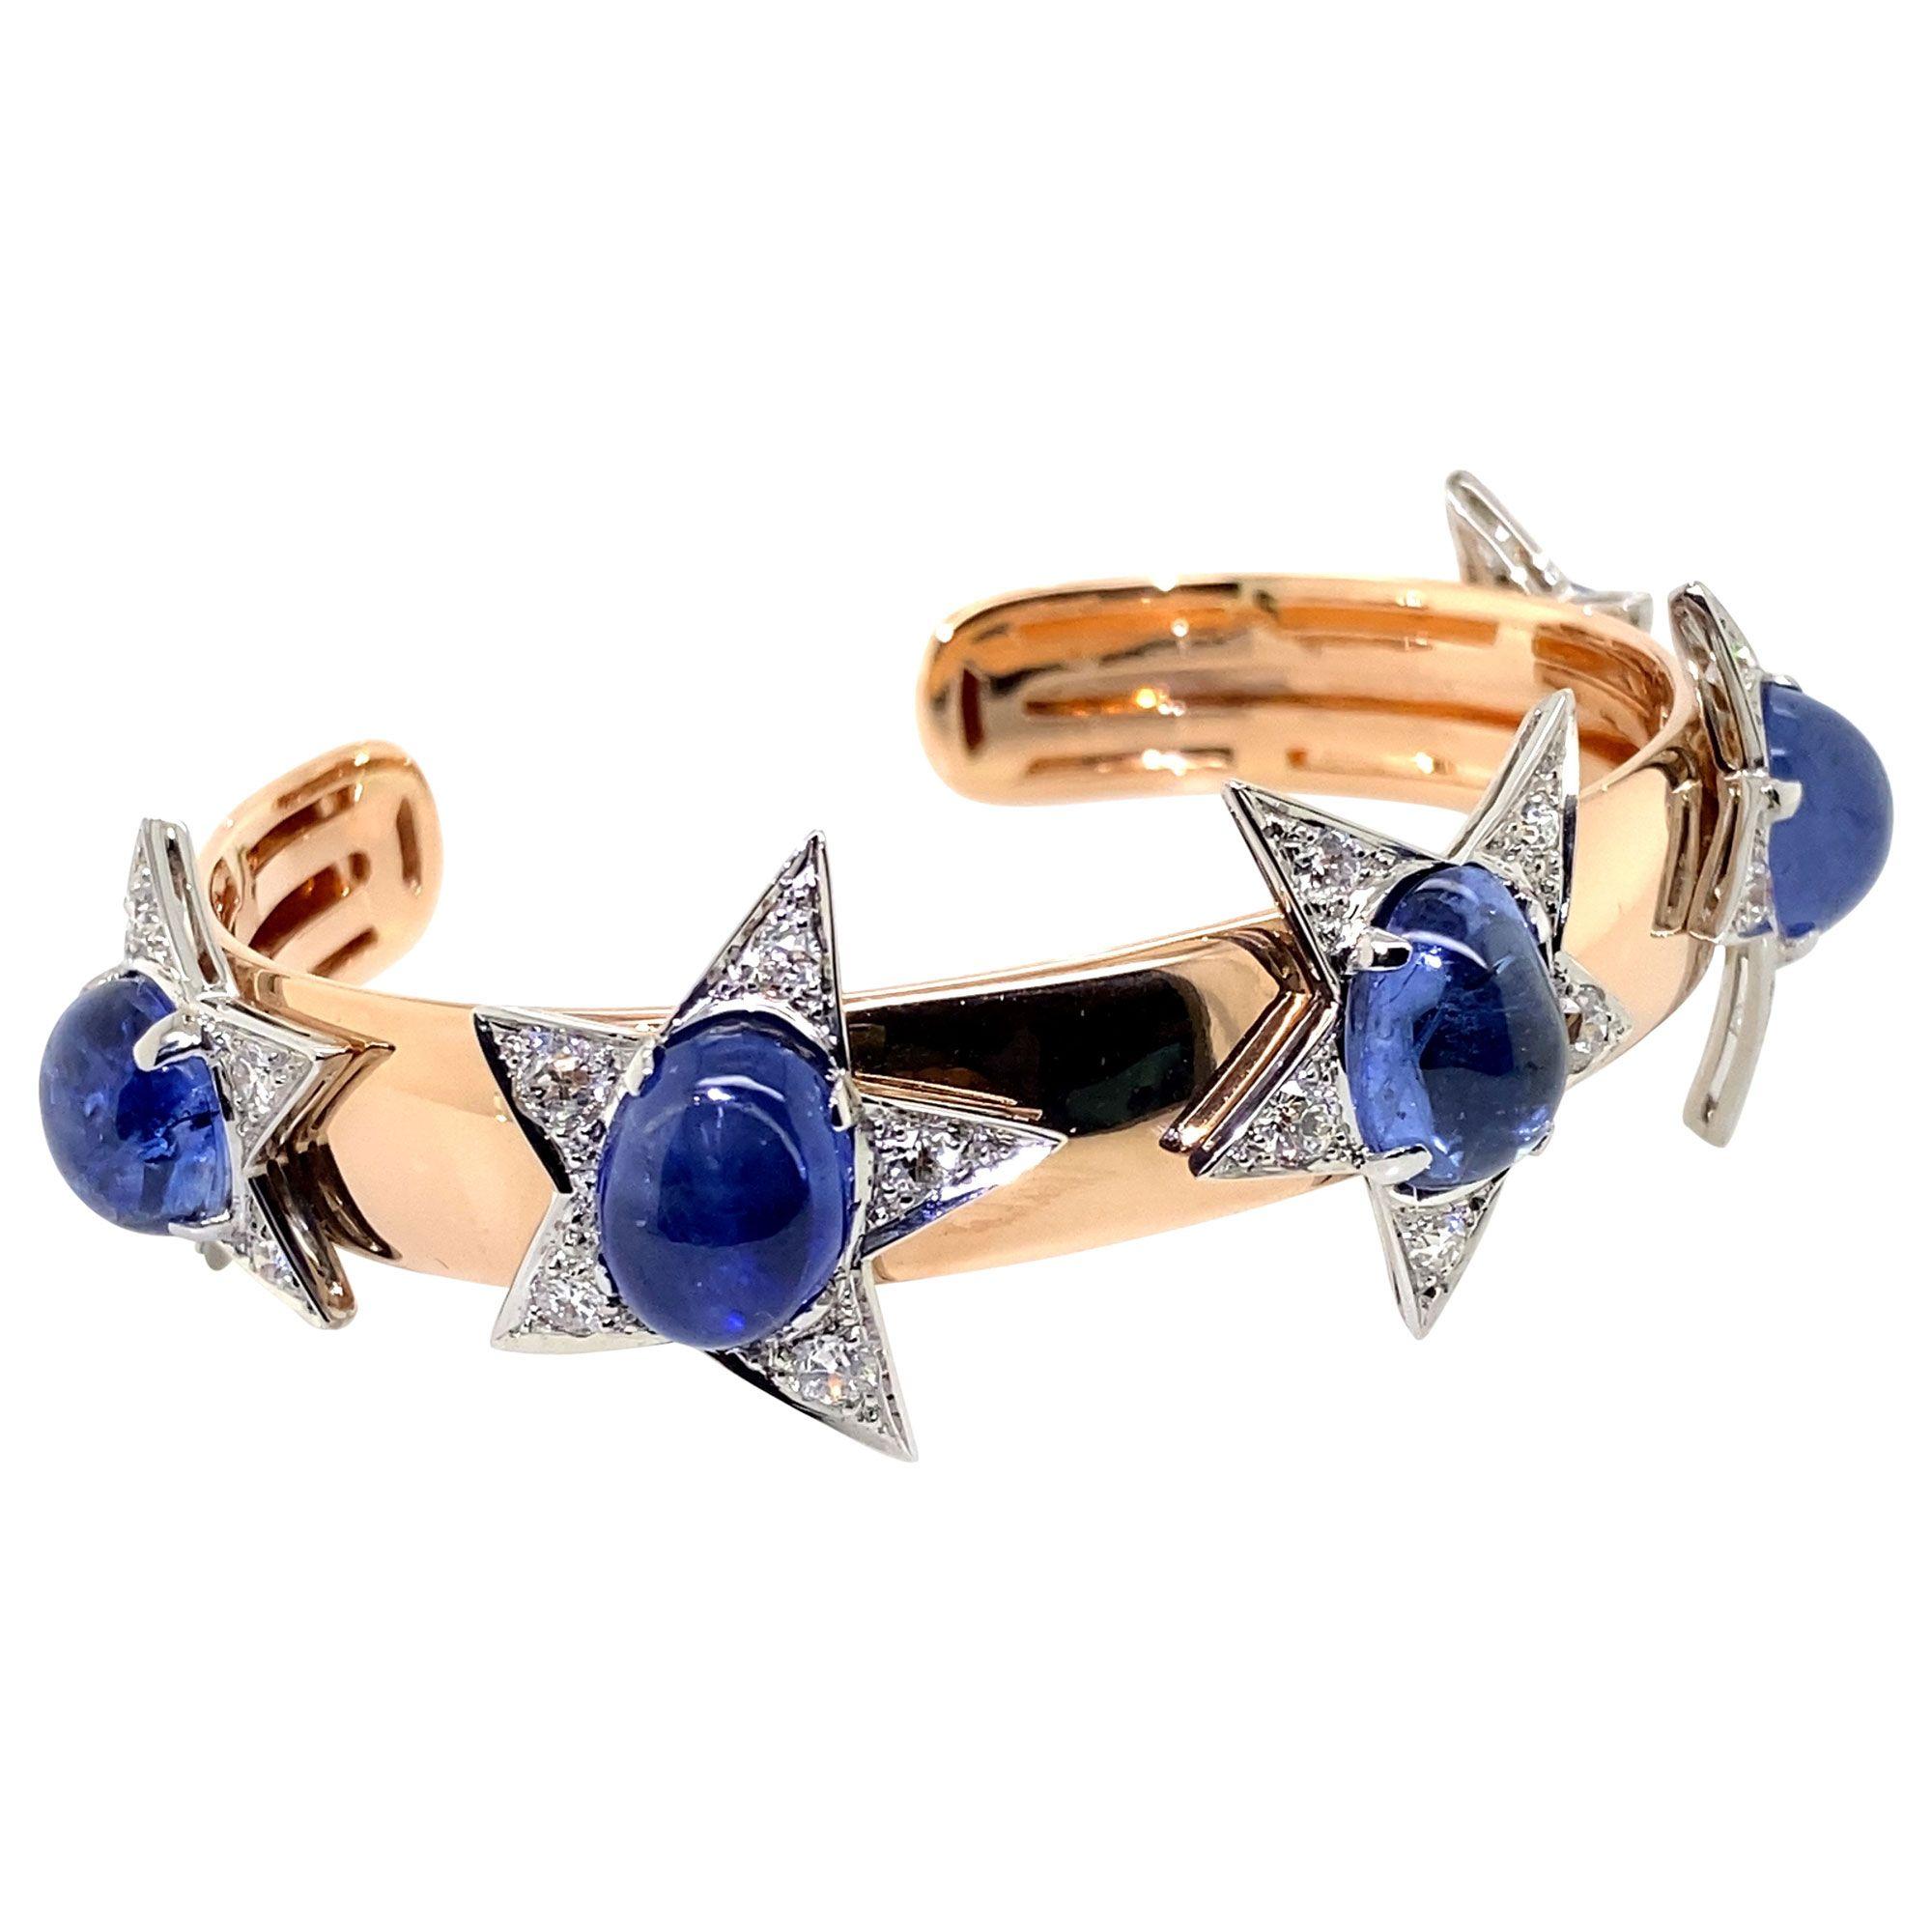 Recreating old world charm into modern 21st century jewels with these beautiful cabochon cut blue sapphire & diamond stars, which were a brooch in a previous life. Pulled from the heavens they have landed on this finely crafted 18k rose gold cuff. 